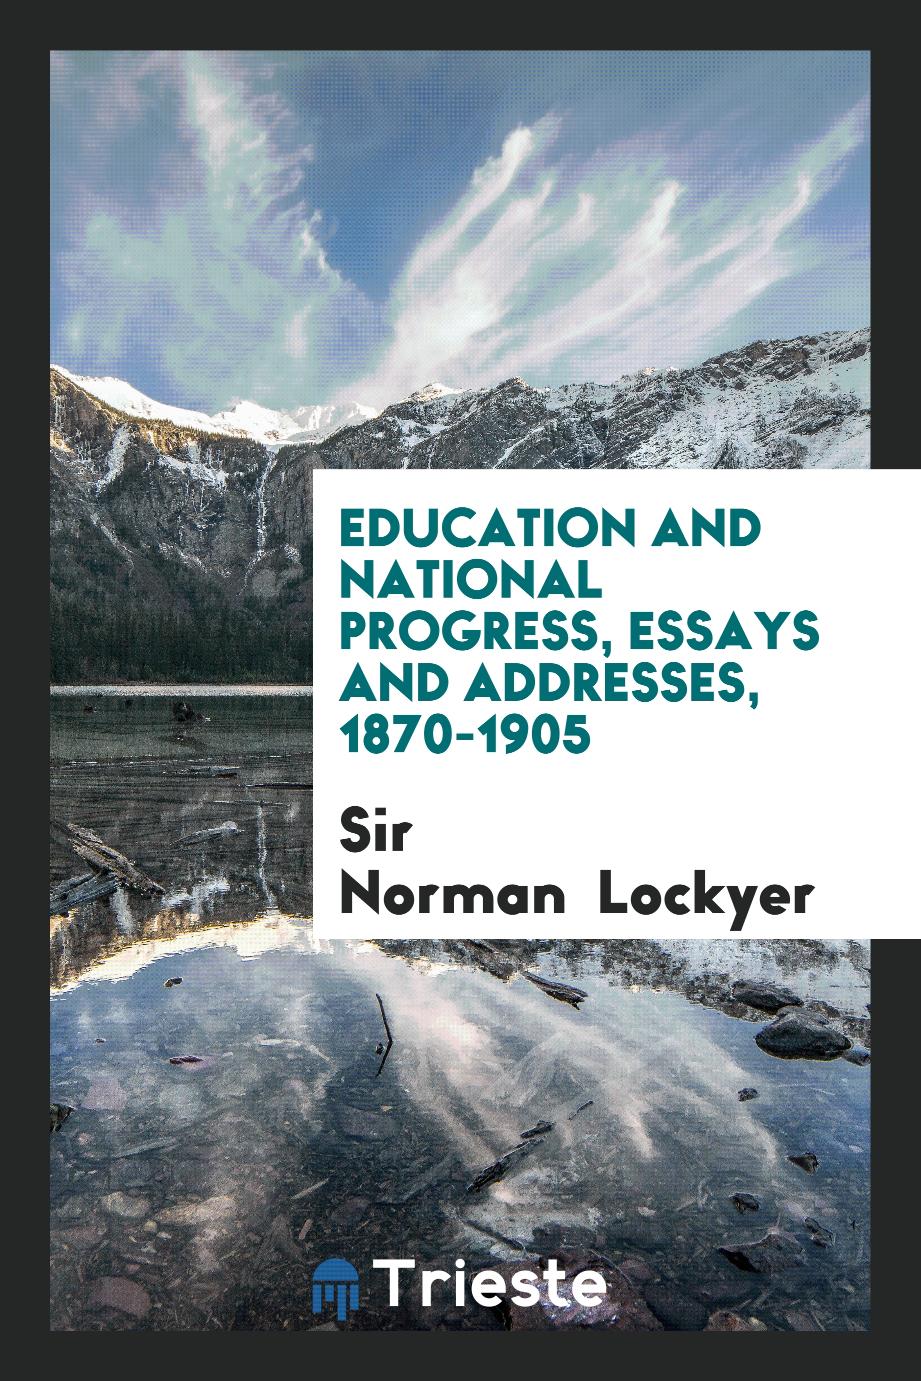 Sir Norman Lockyer - Education and National Progress, Essays and Addresses, 1870-1905